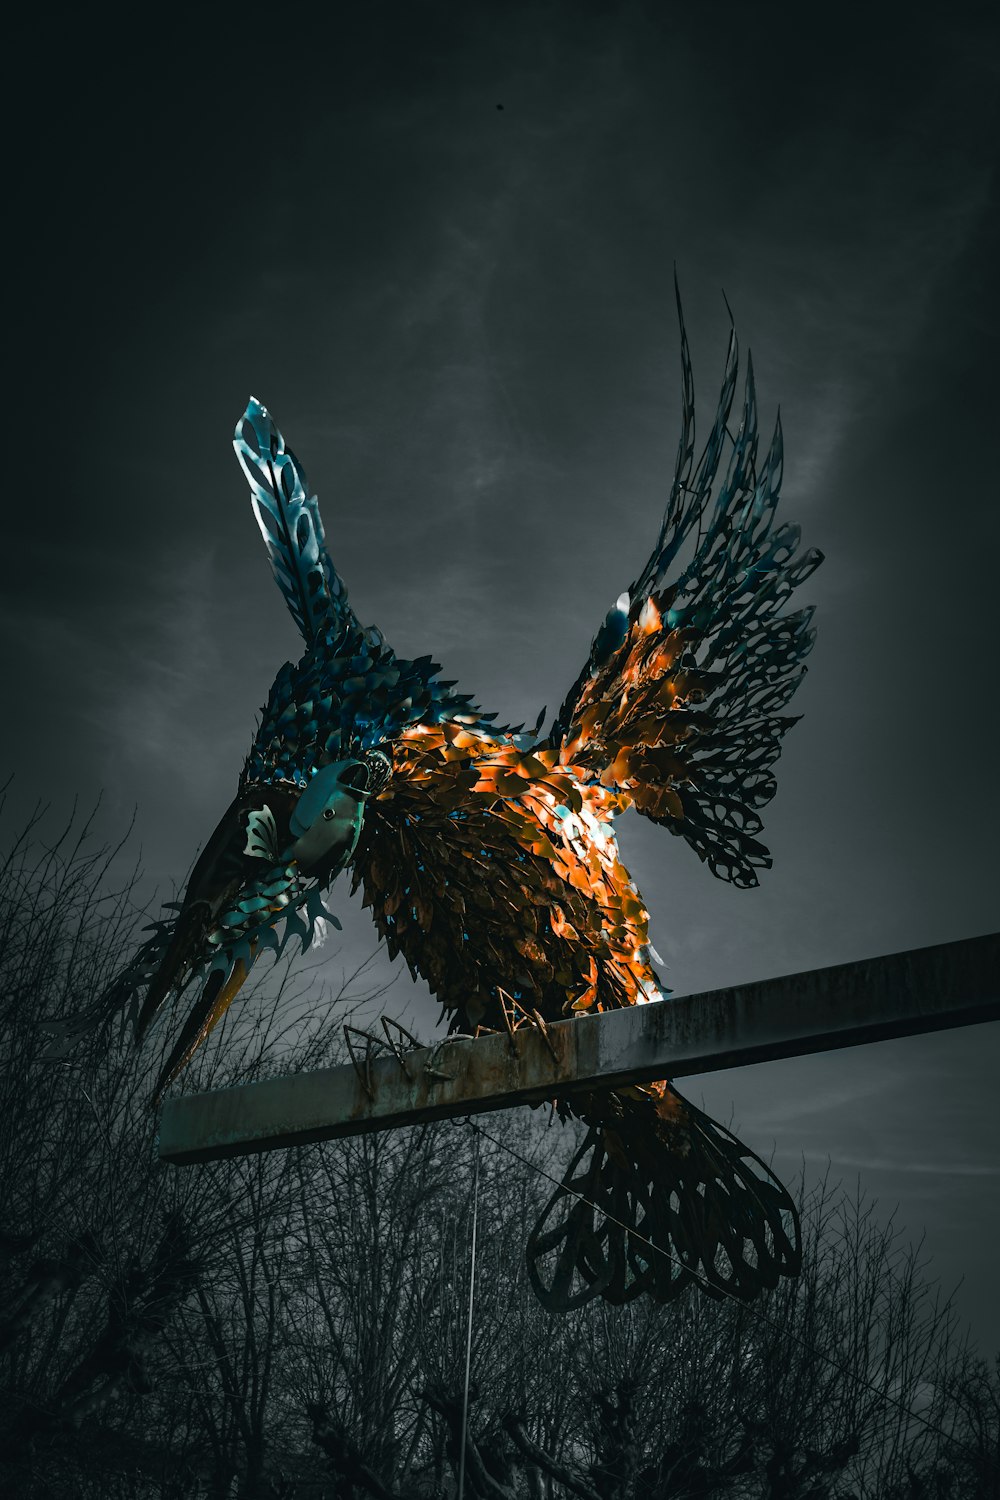 a large metal bird sculpture sitting on top of a metal pole